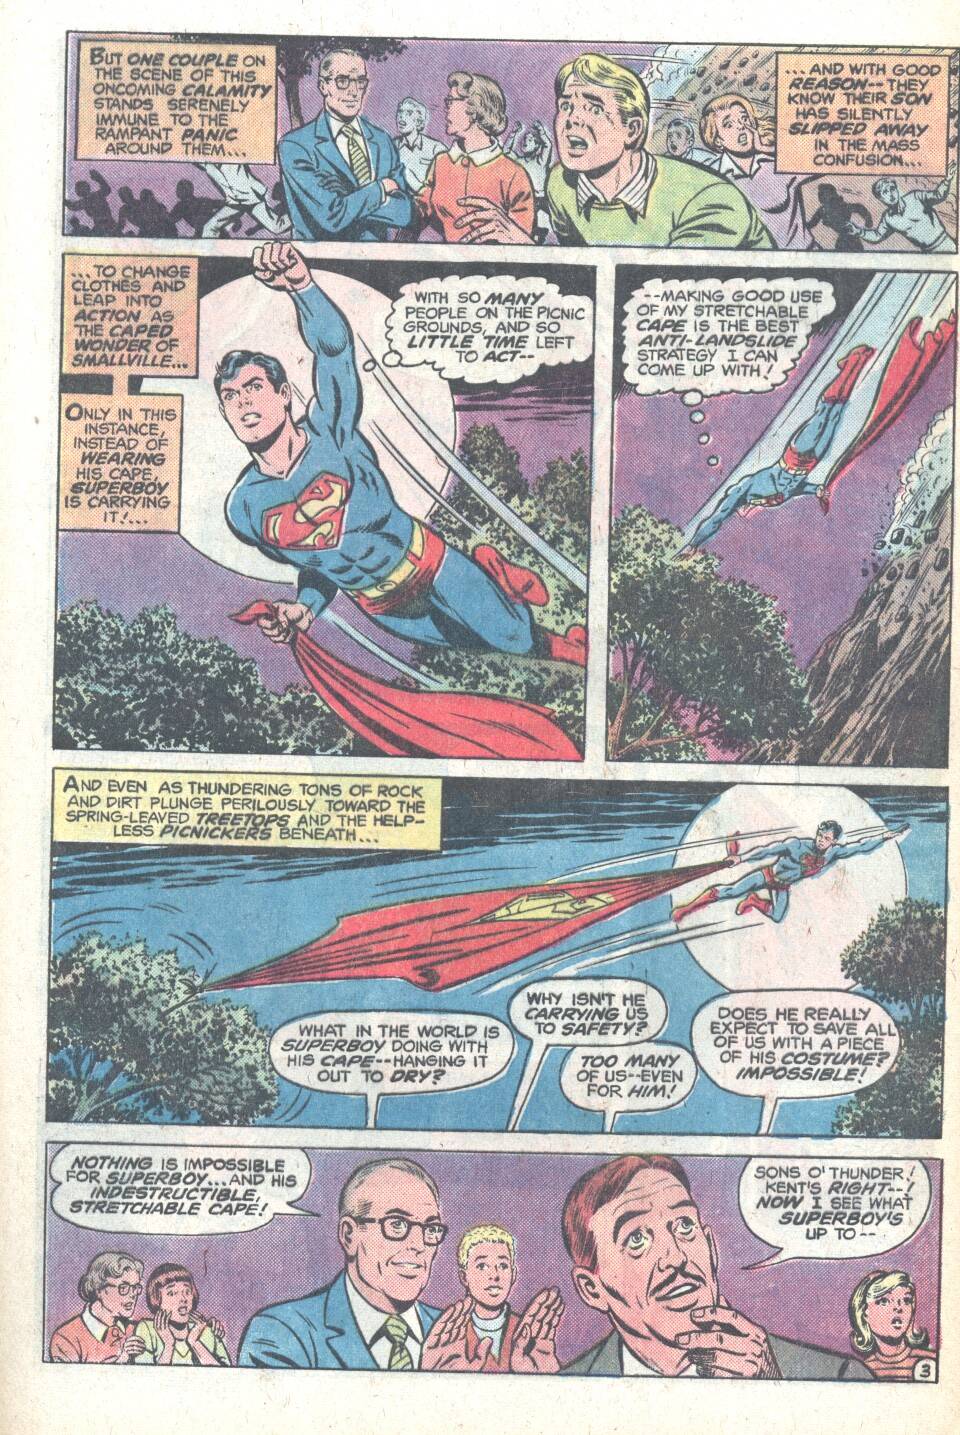 The New Adventures of Superboy 7 Page 3